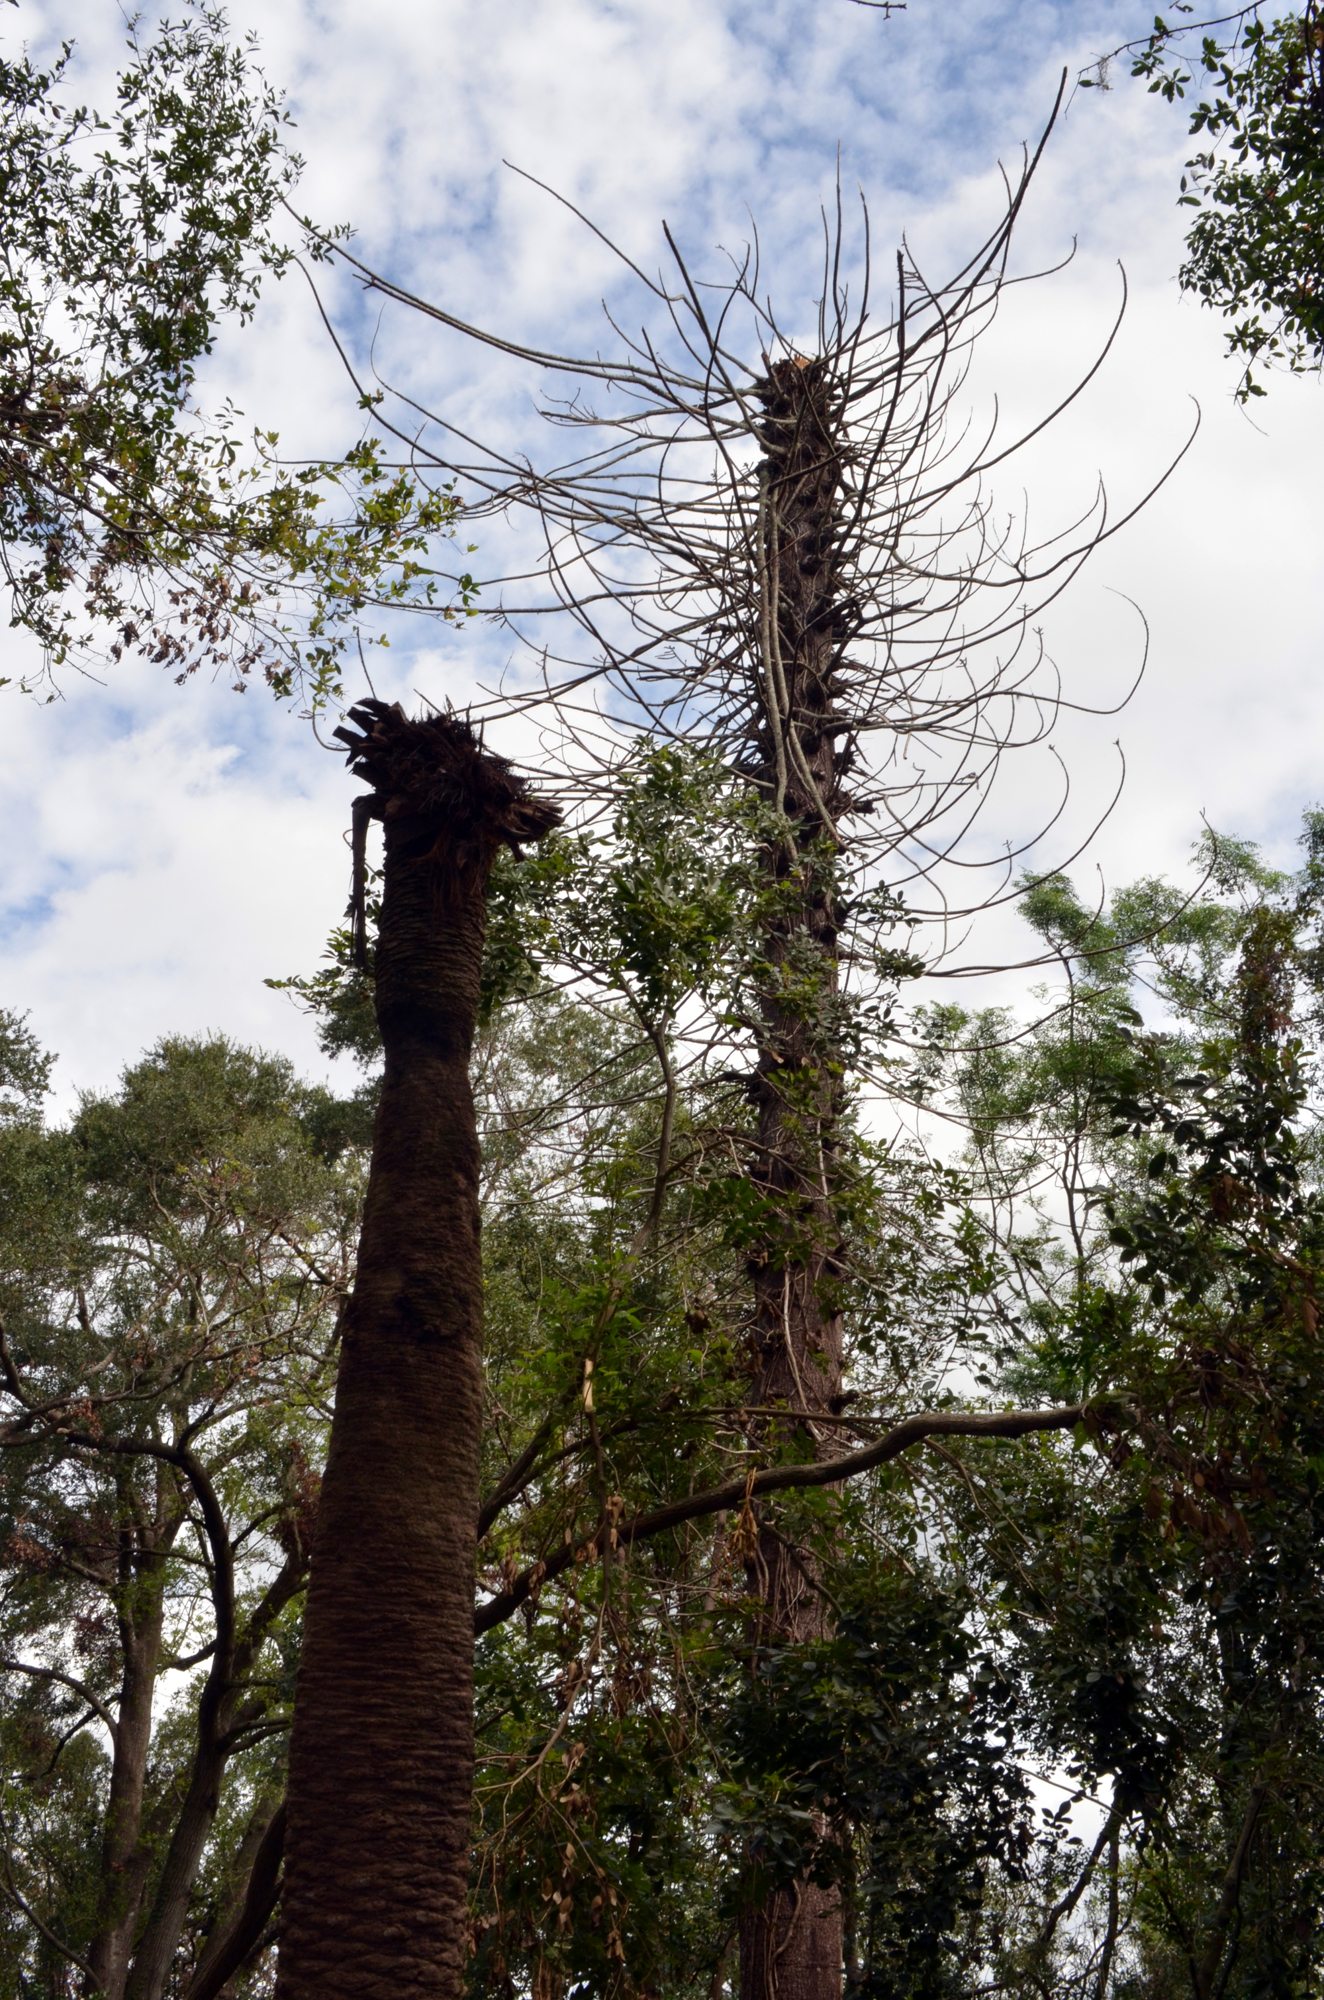 The top third of the Bunya pine, right, planted by Henry Nehrling more than a century ago, snapped off during the hurricane, seriously injuring one of Nehrling's historic palm trees.